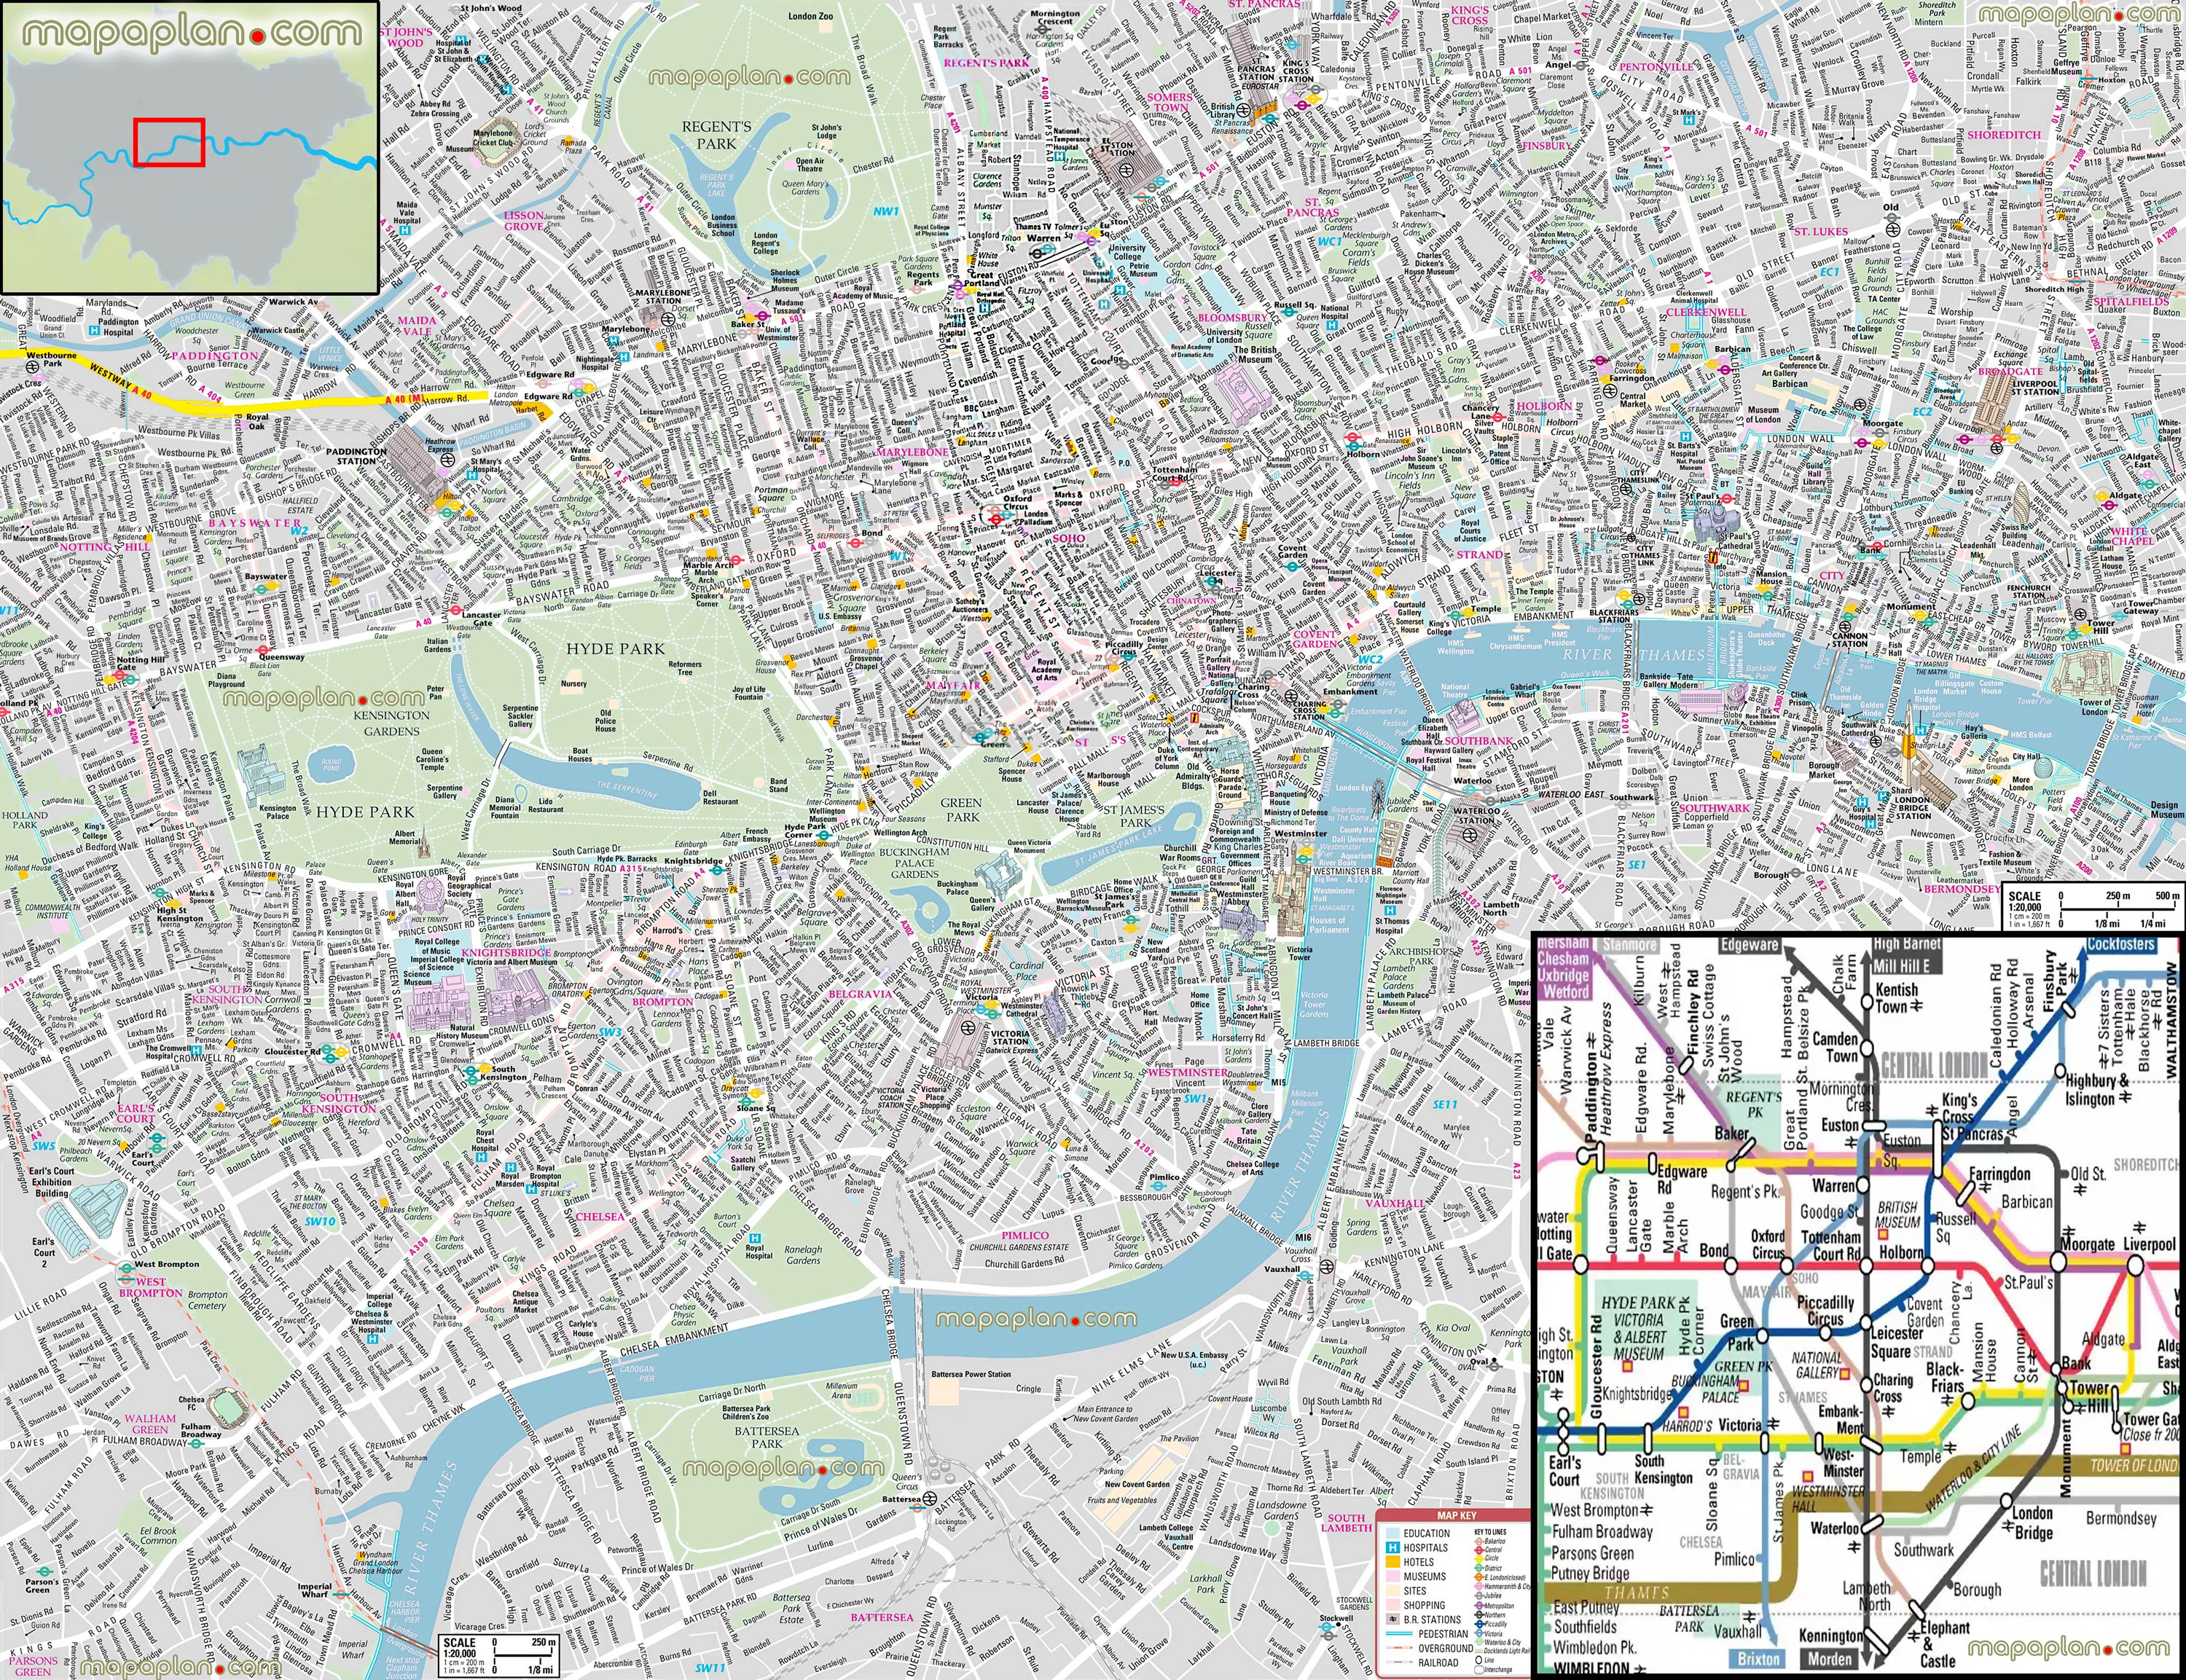 London Maps - Top Tourist Attractions - Free, Printable City Street - Printable Street Maps Free